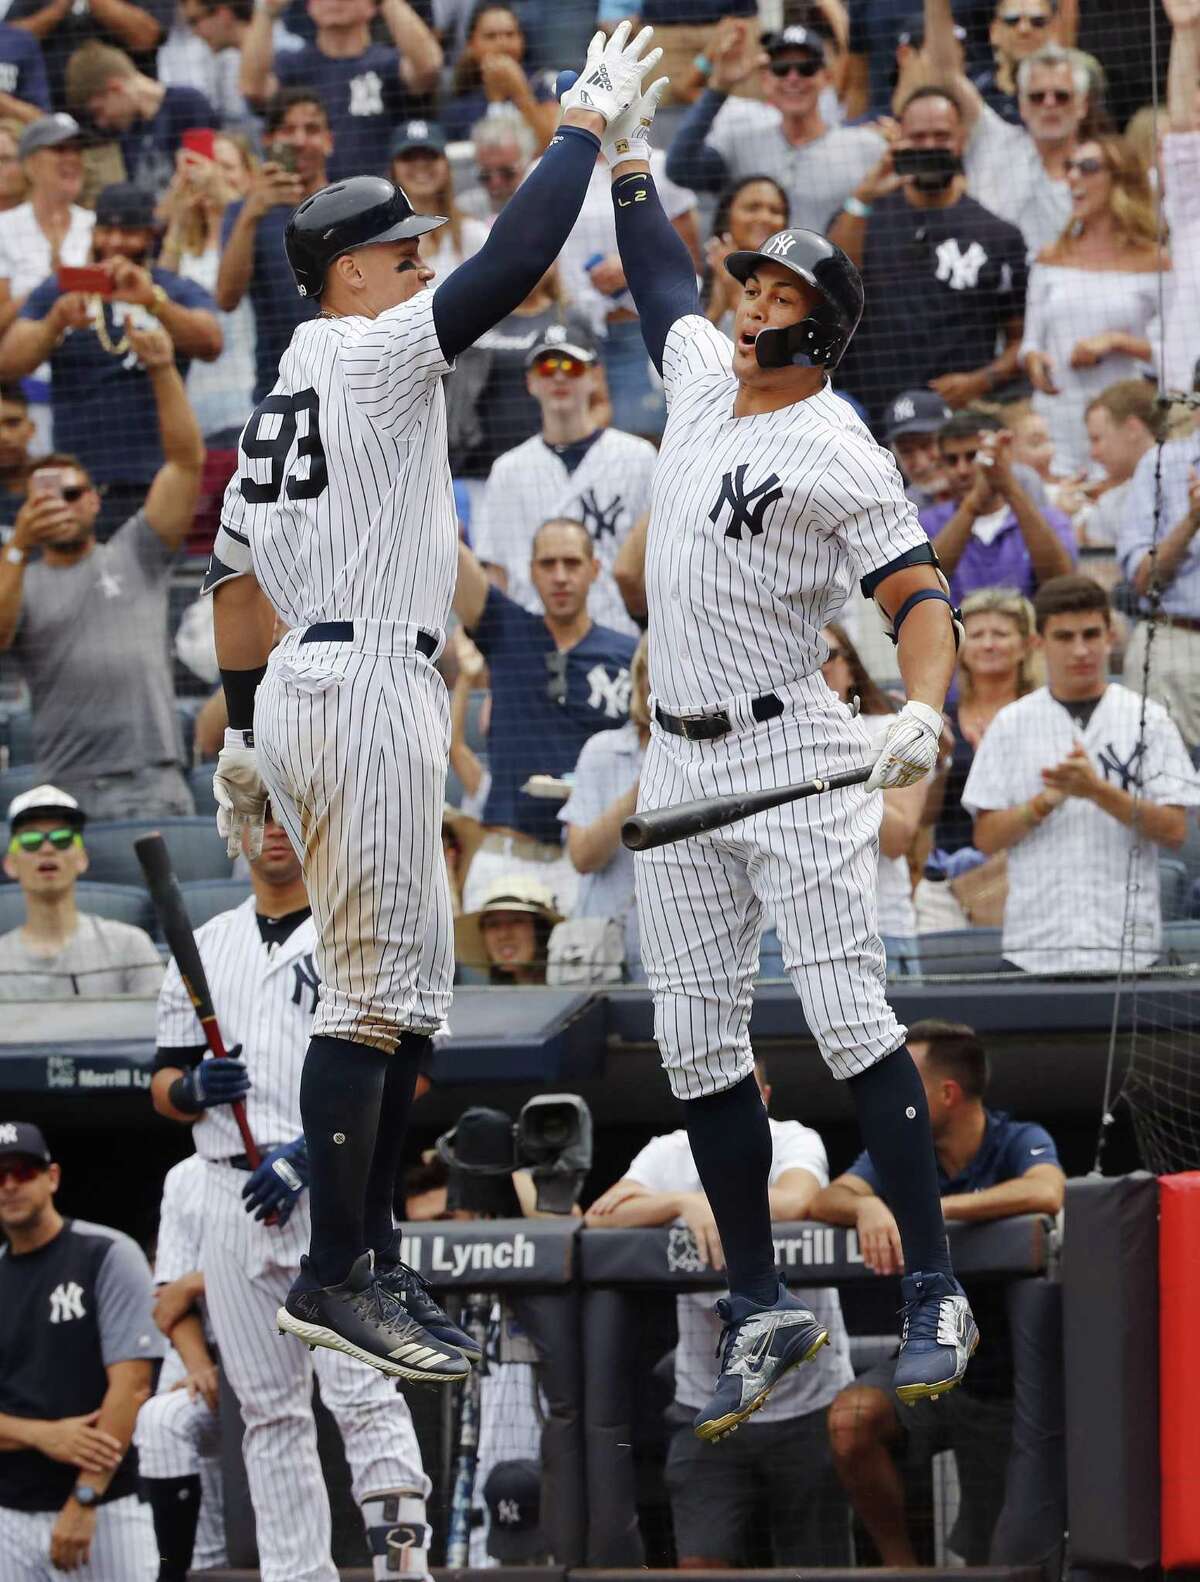 NEW YORK, NY - JULY 21: Aaron Judge #99 of the New York Yankees celebrates with teammate Giancarlo Stanton at the dugout after he hit a home run in the seventh inning during an interleague MLB baseball game against the New York Mets on July 21, 2018 at Yankee Stadium in the Bronx borough of New York City. Yankees won 7-6. (Photo by Paul Bereswill/Getty Images)